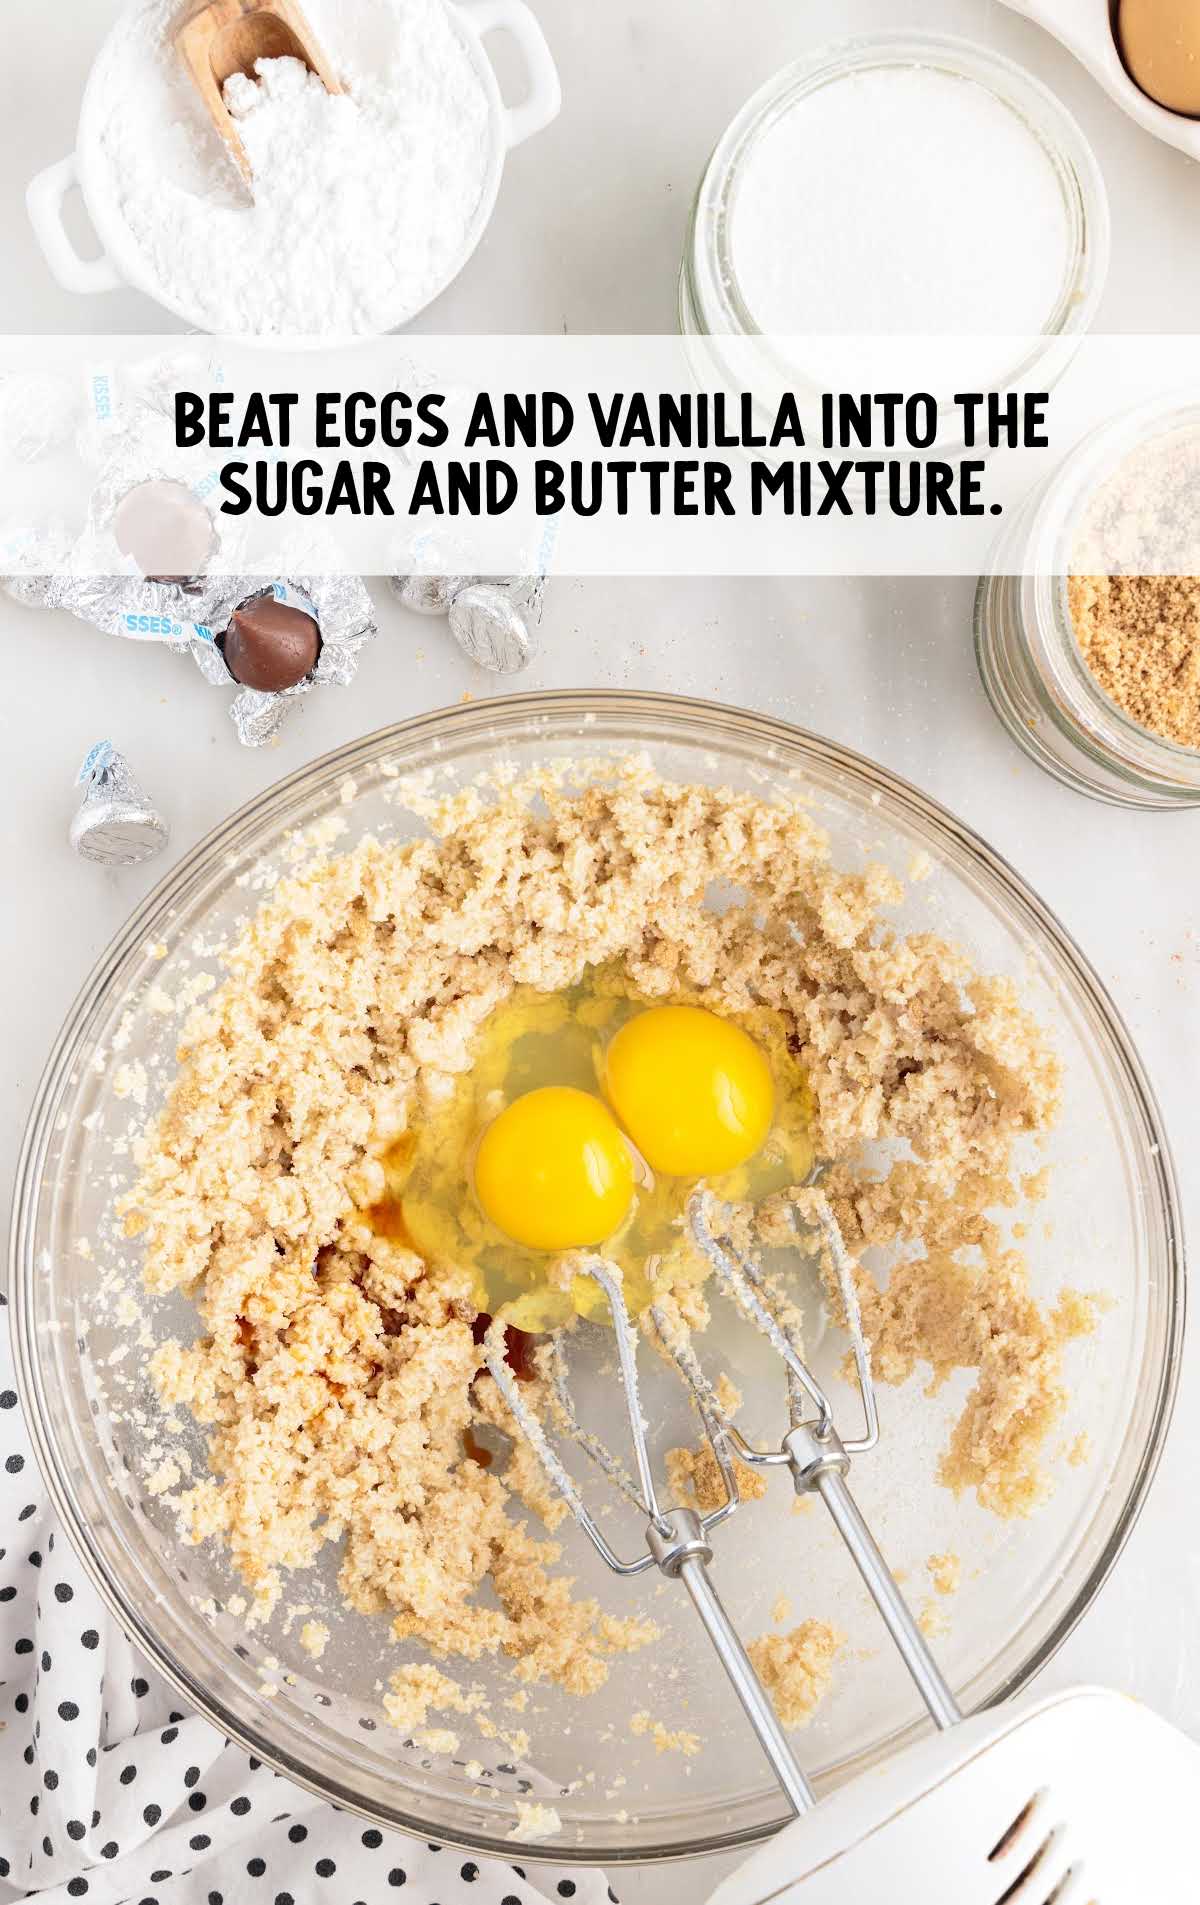 egg and vanilla added to the sugar and butter mixture and blended together in a bowl